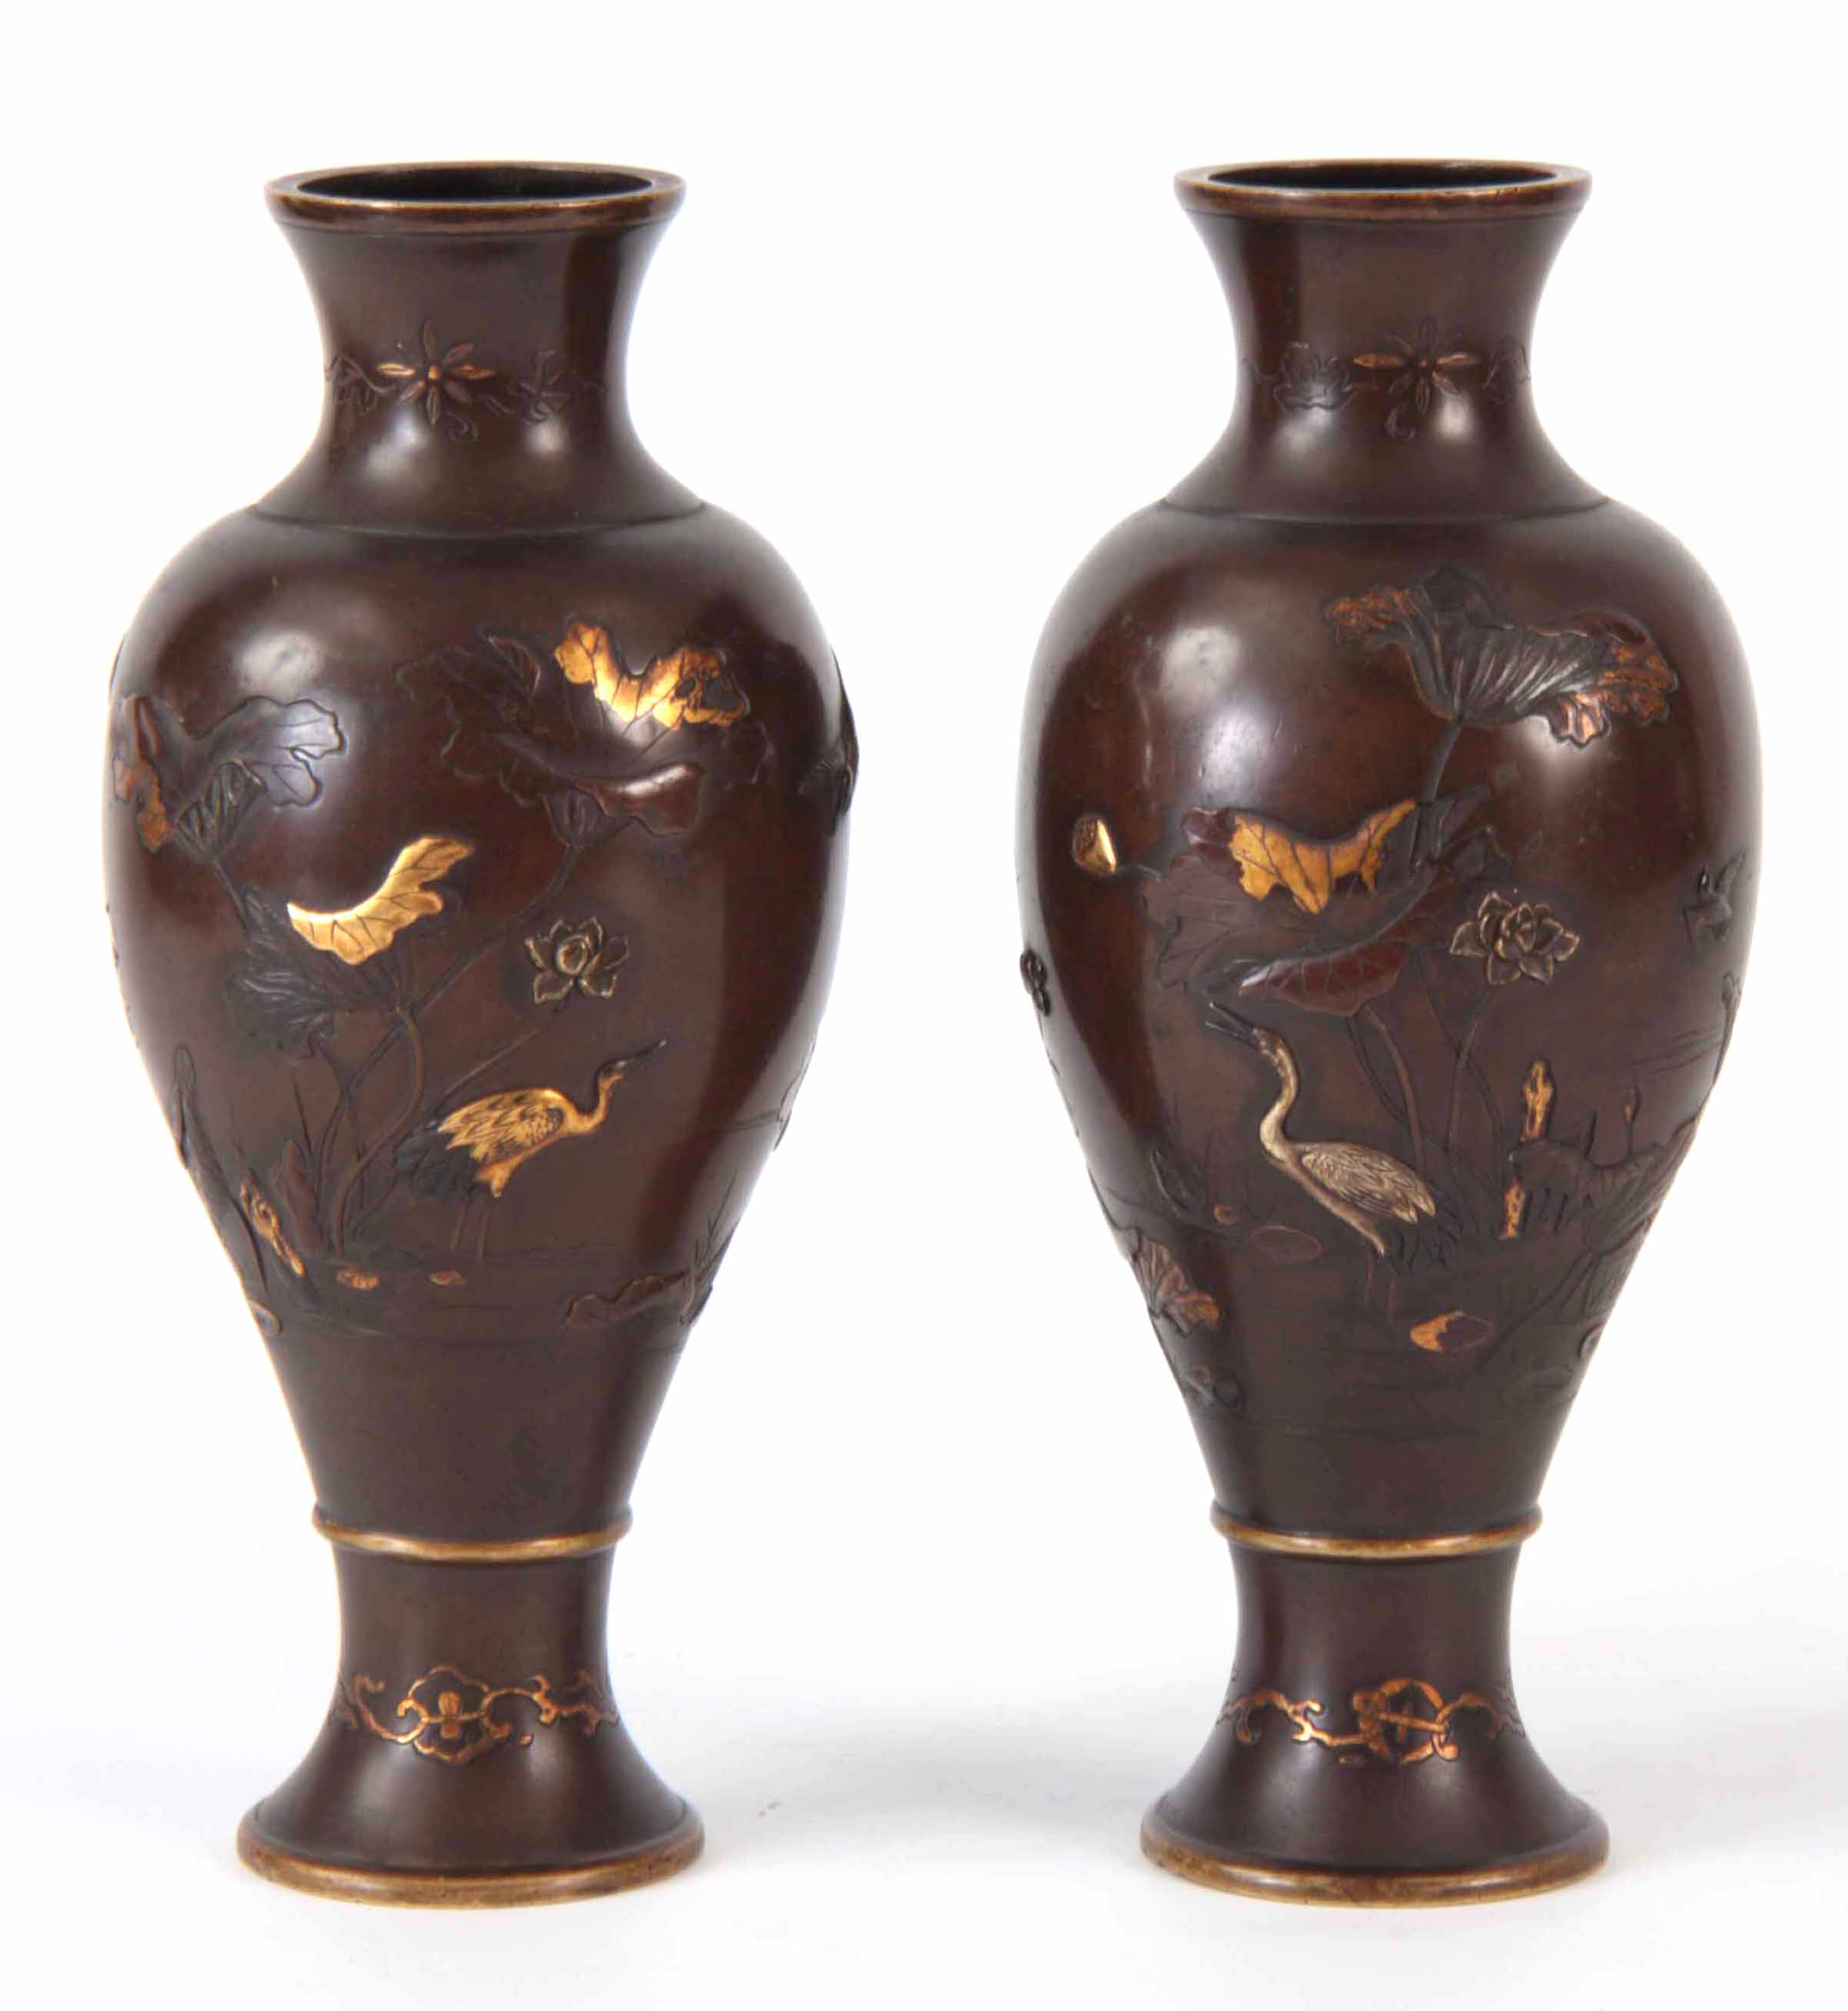 A PAIR OF MEIJI PERIOD JAPANESE BRONZE INLAID VASES decorated with gold and silver inlays of